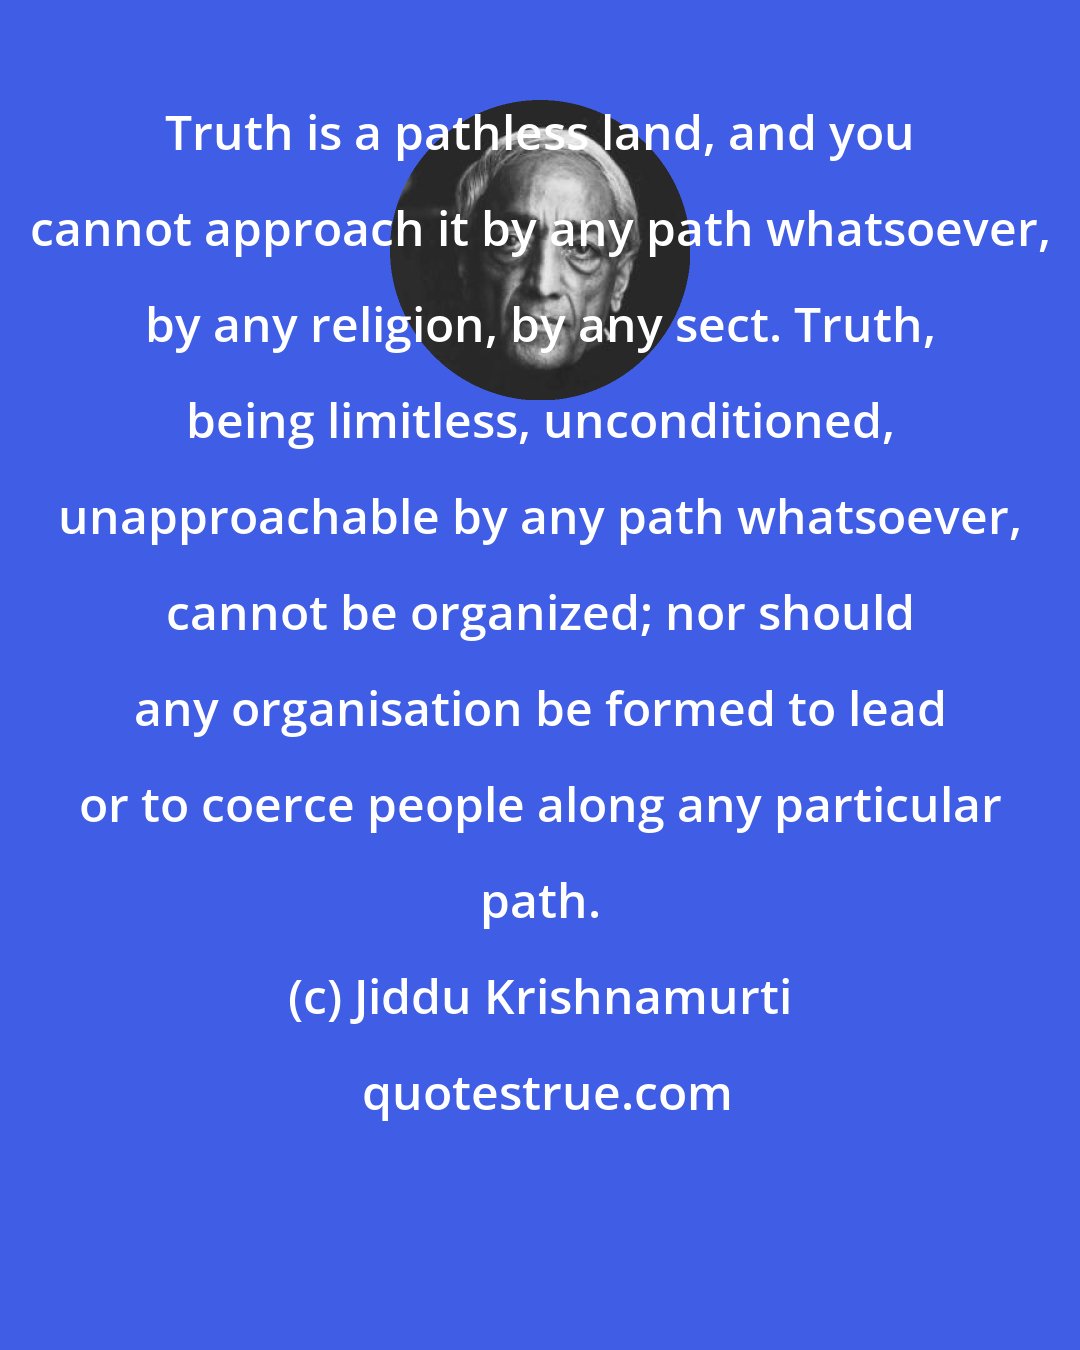 Jiddu Krishnamurti: Truth is a pathless land, and you cannot approach it by any path whatsoever, by any religion, by any sect. Truth, being limitless, unconditioned, unapproachable by any path whatsoever, cannot be organized; nor should any organisation be formed to lead or to coerce people along any particular path.